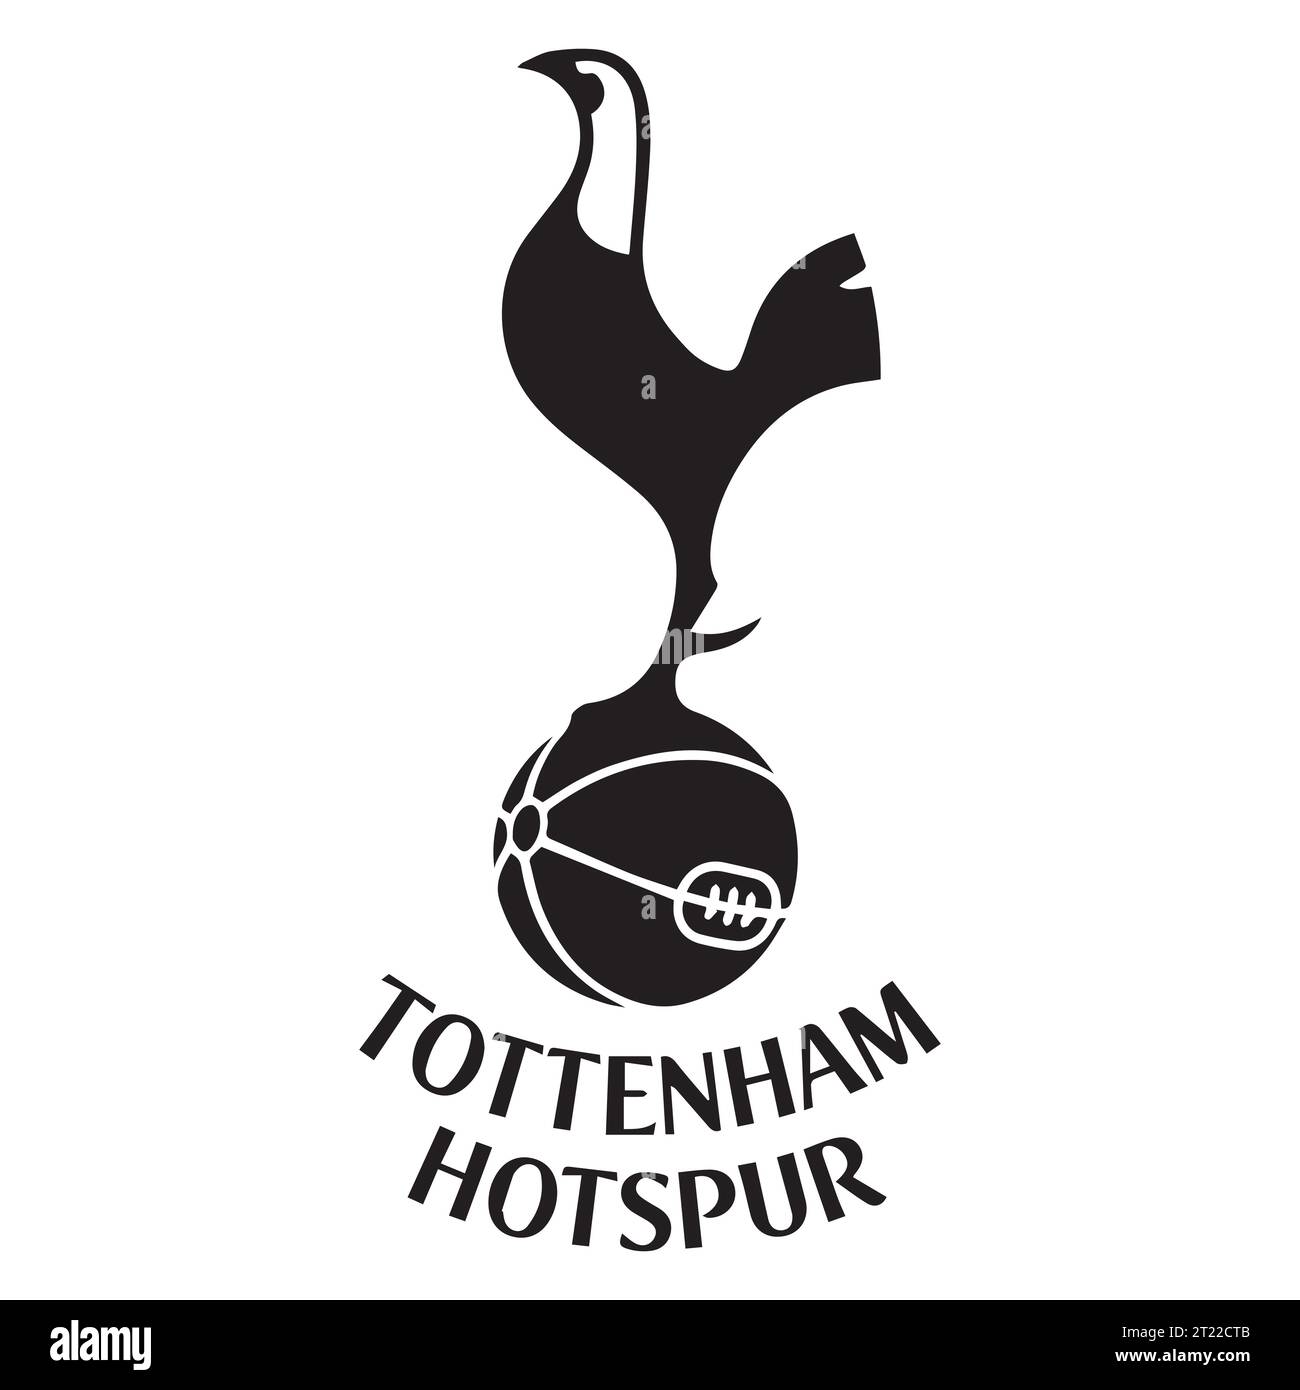 Tottenham Hotspur FC Black and White Logo England Professional Football League System, Vector Illustration Abstract Black and White Editable image Illustrazione Vettoriale